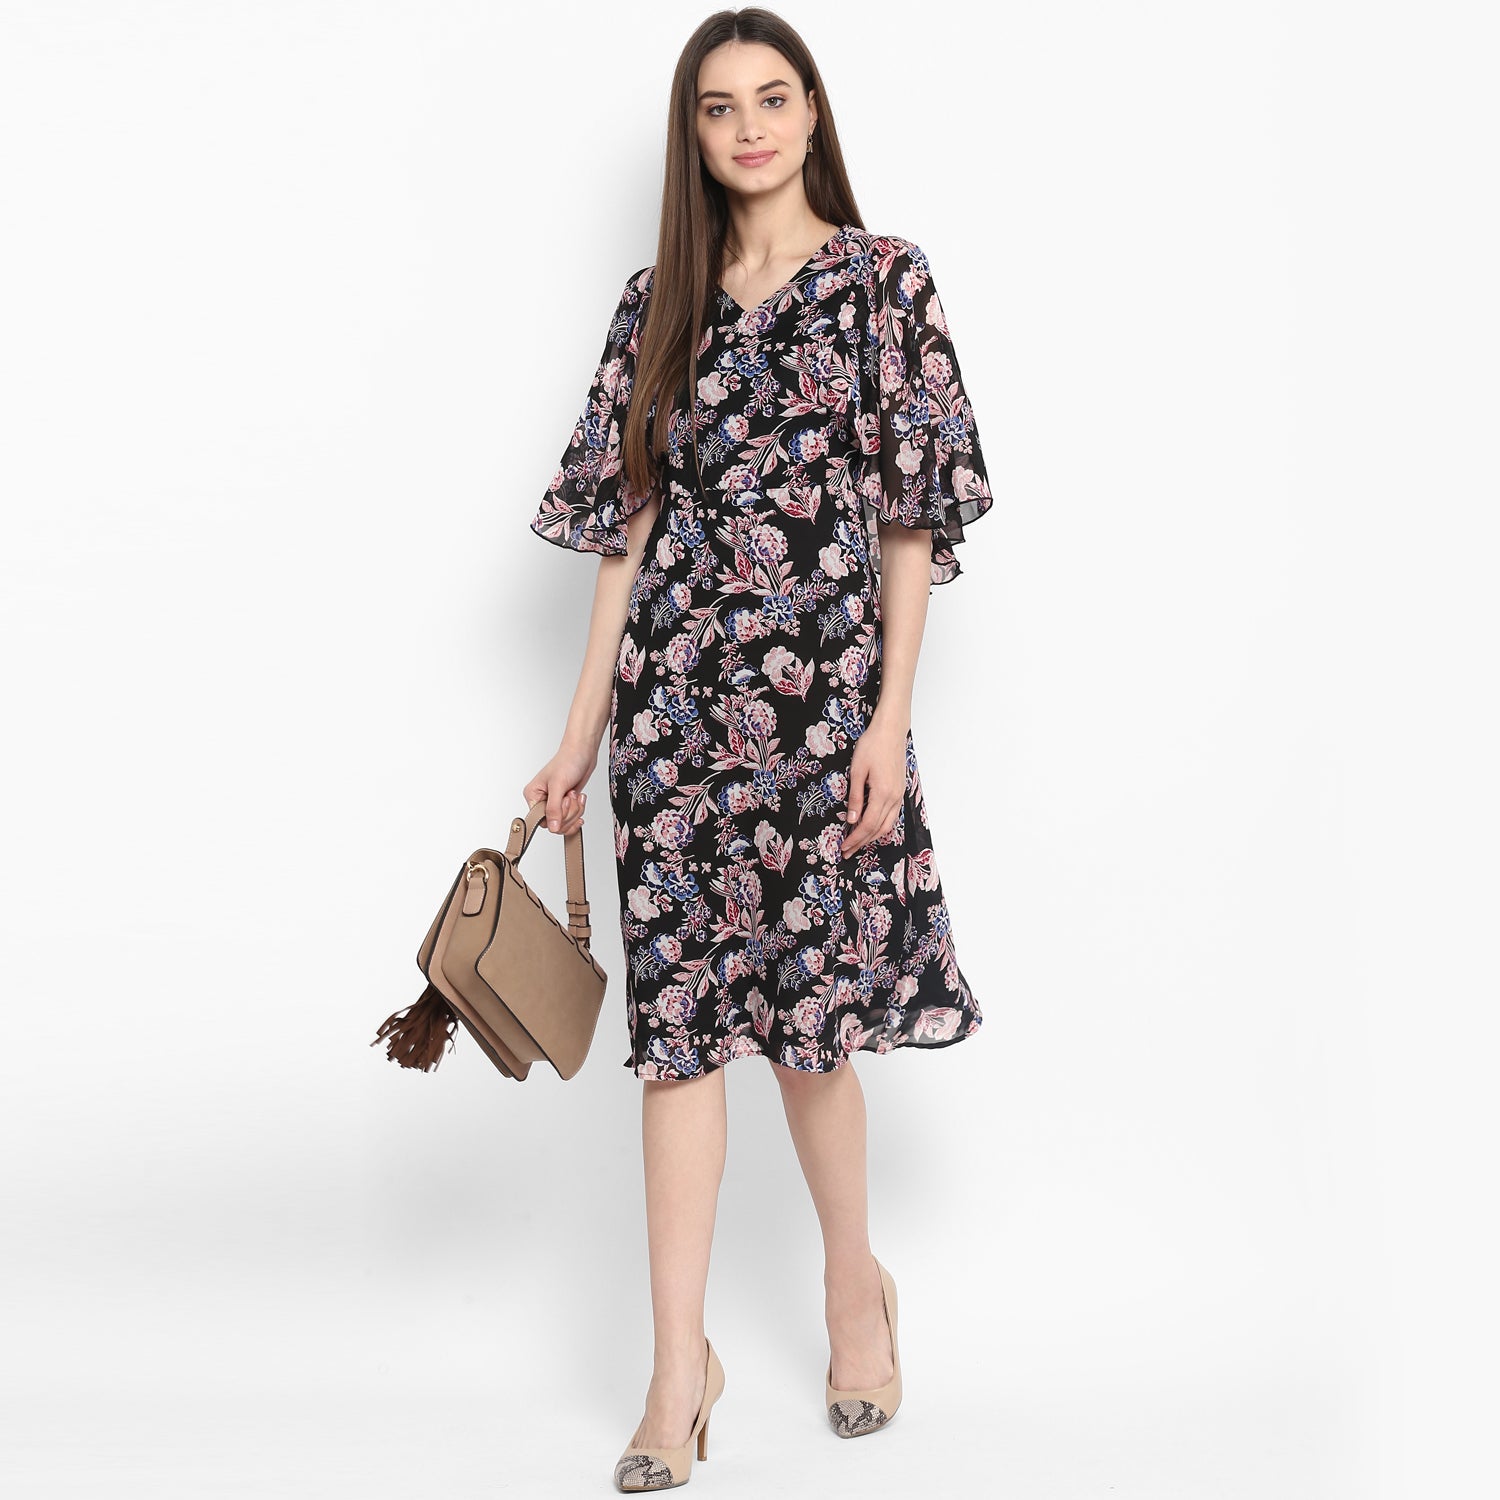 Women's Black Floral Dress with attached Shrug - StyleStone